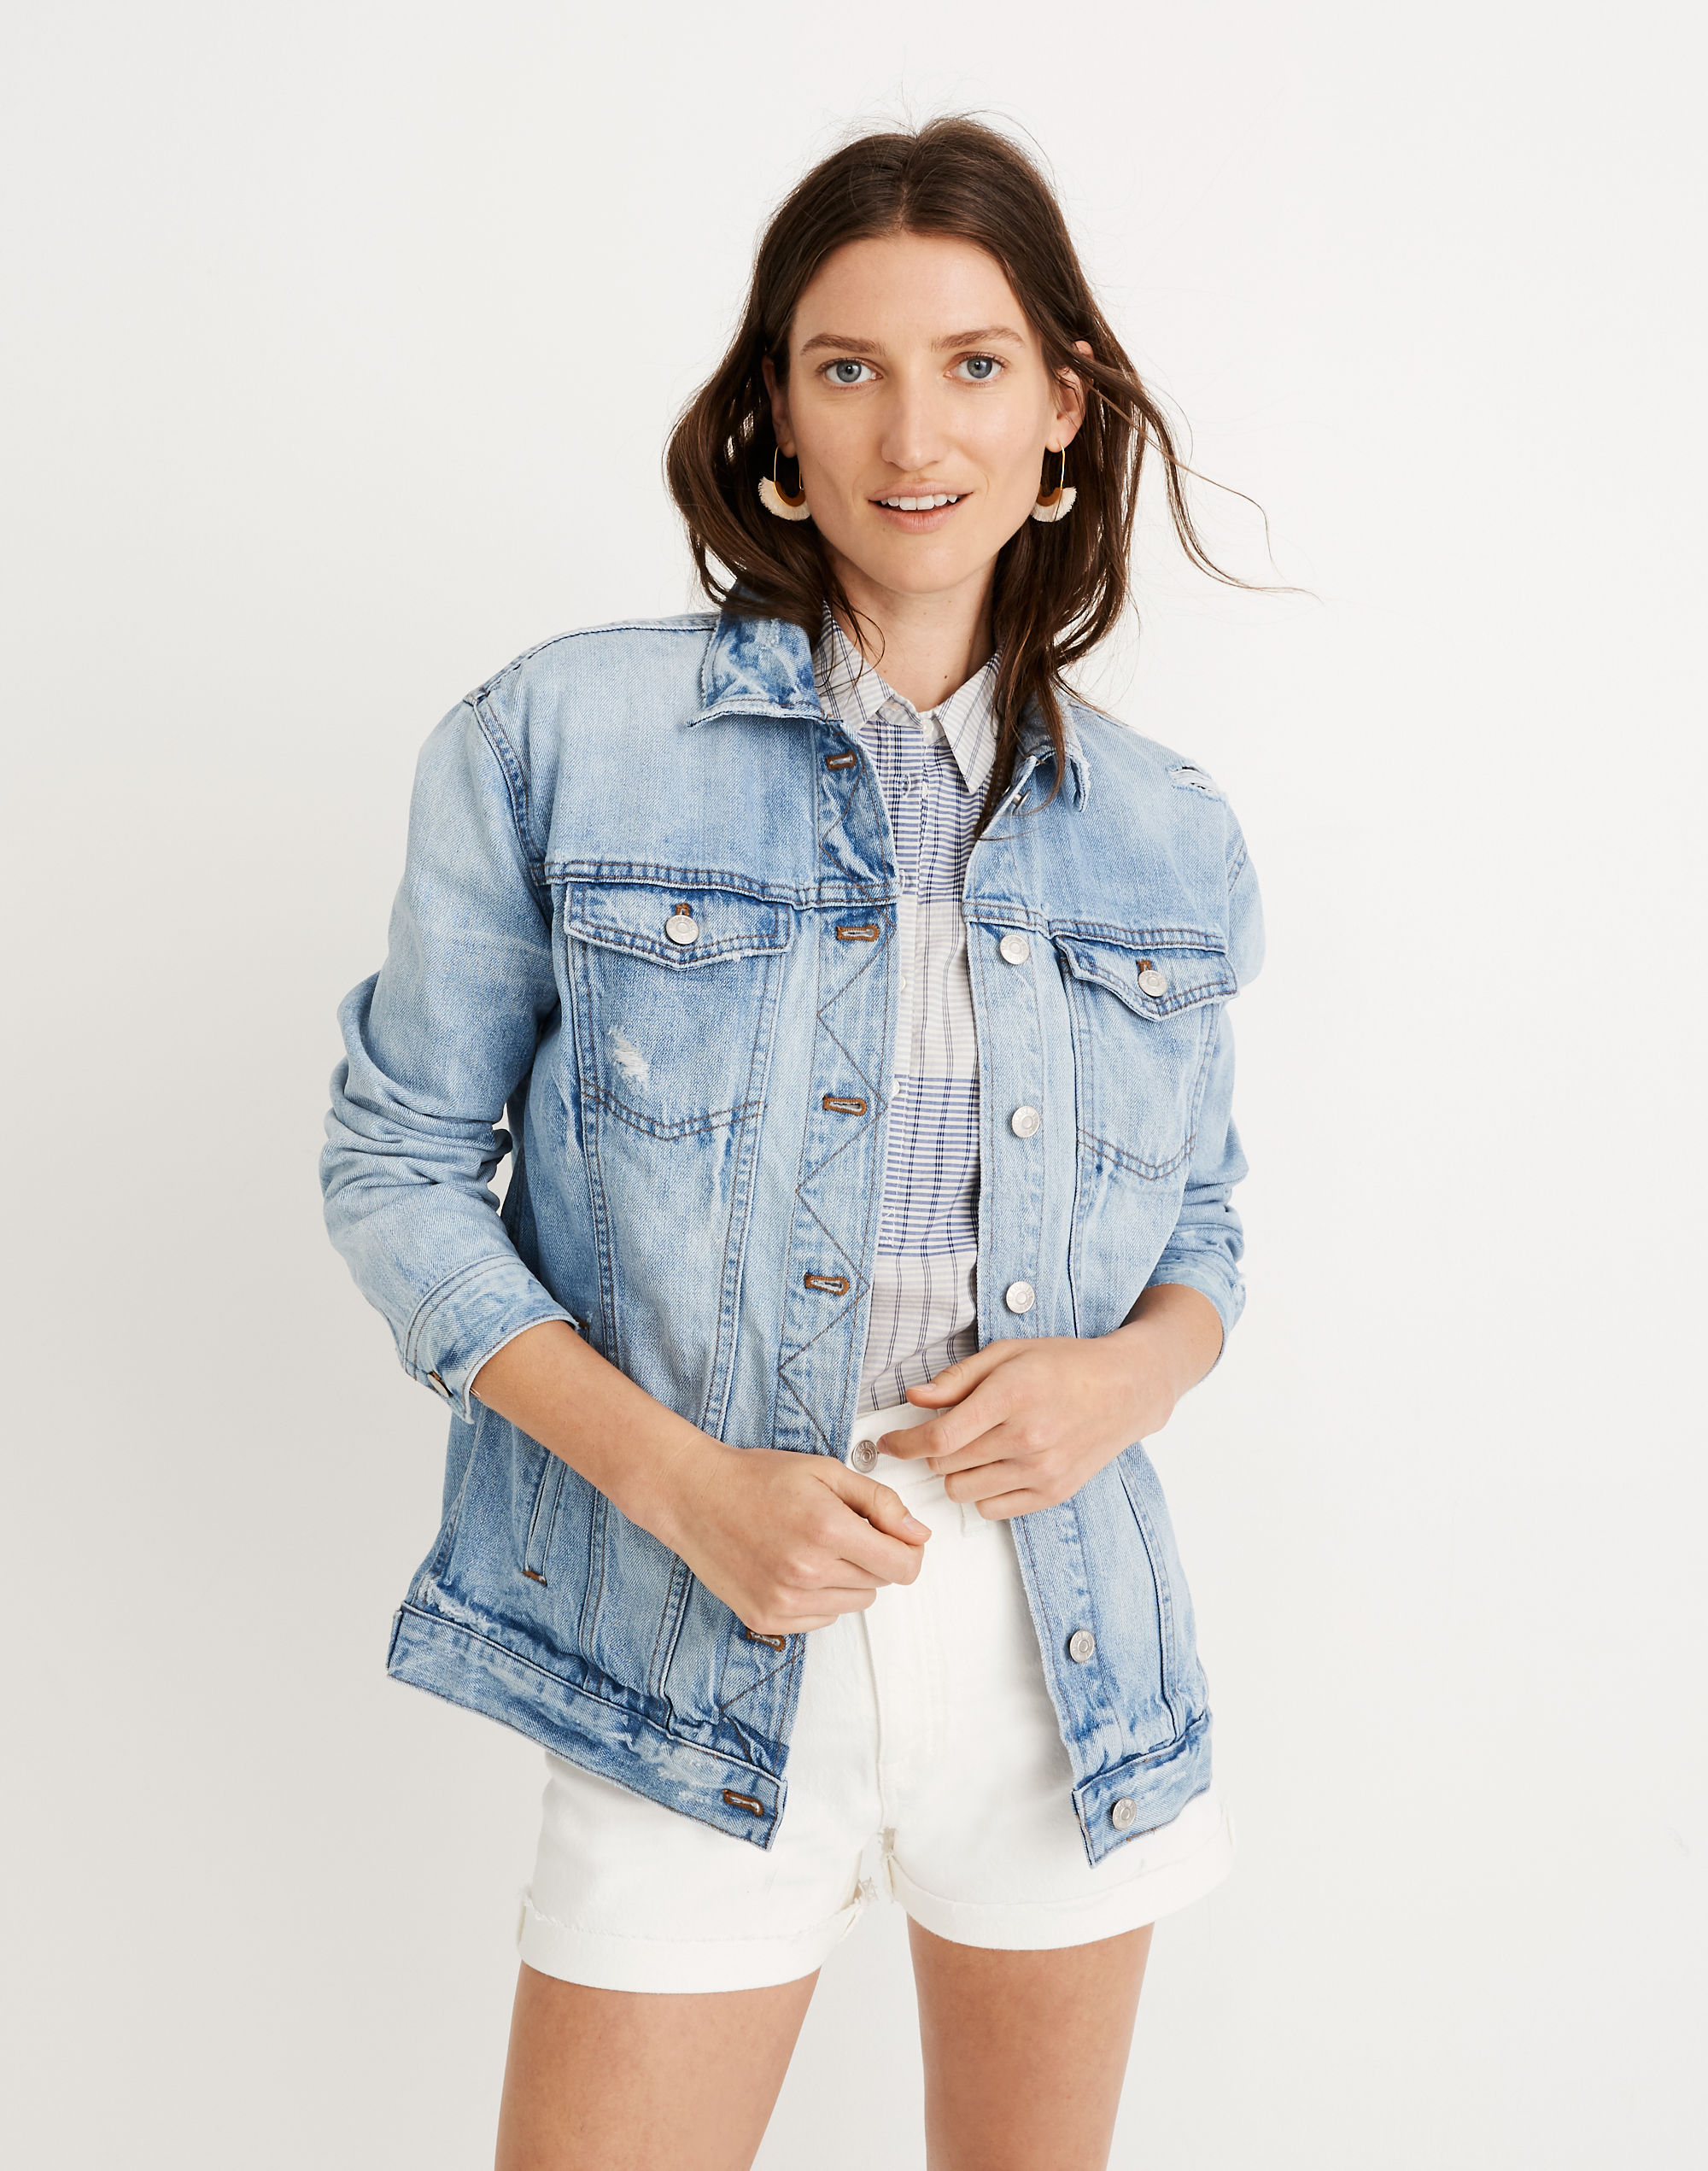 Women's Oversized Jean Jacket in Junction Wash: Distressed Edition ...